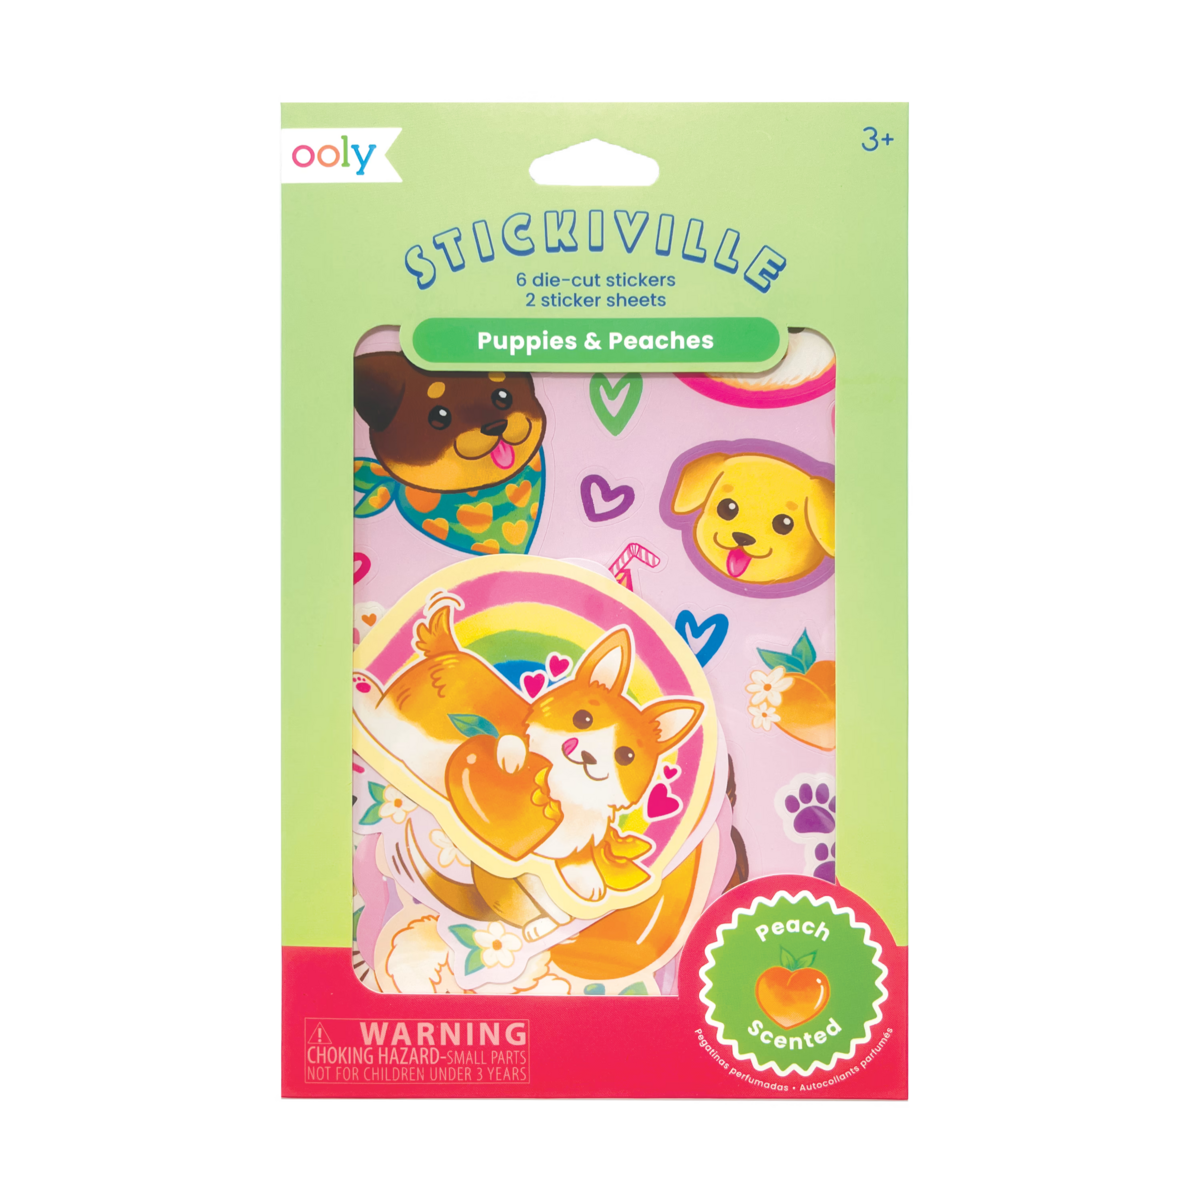 Stickiville Puppies and Peaches scented sticker sheets in packaging